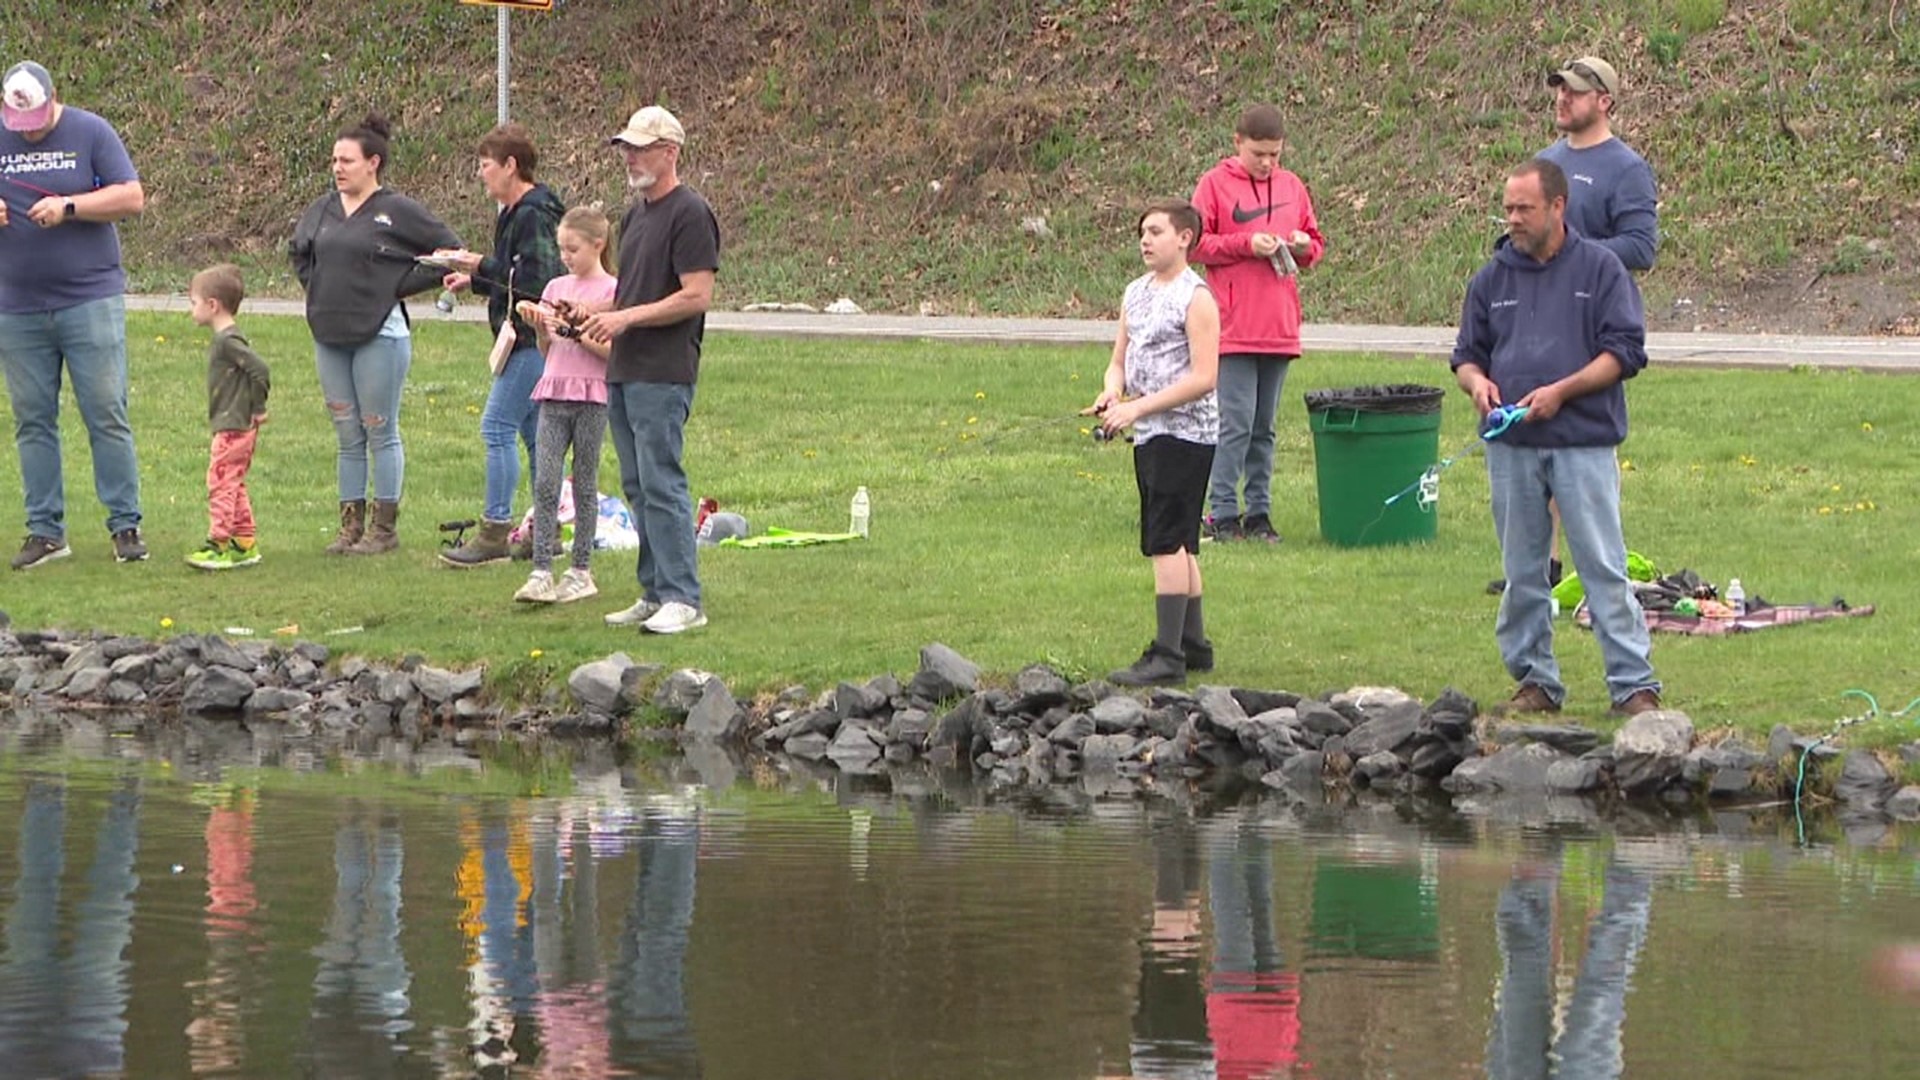 Kids from all over took place in the Pocono Township Kids Fishing Derby at TLC Park Saturday.